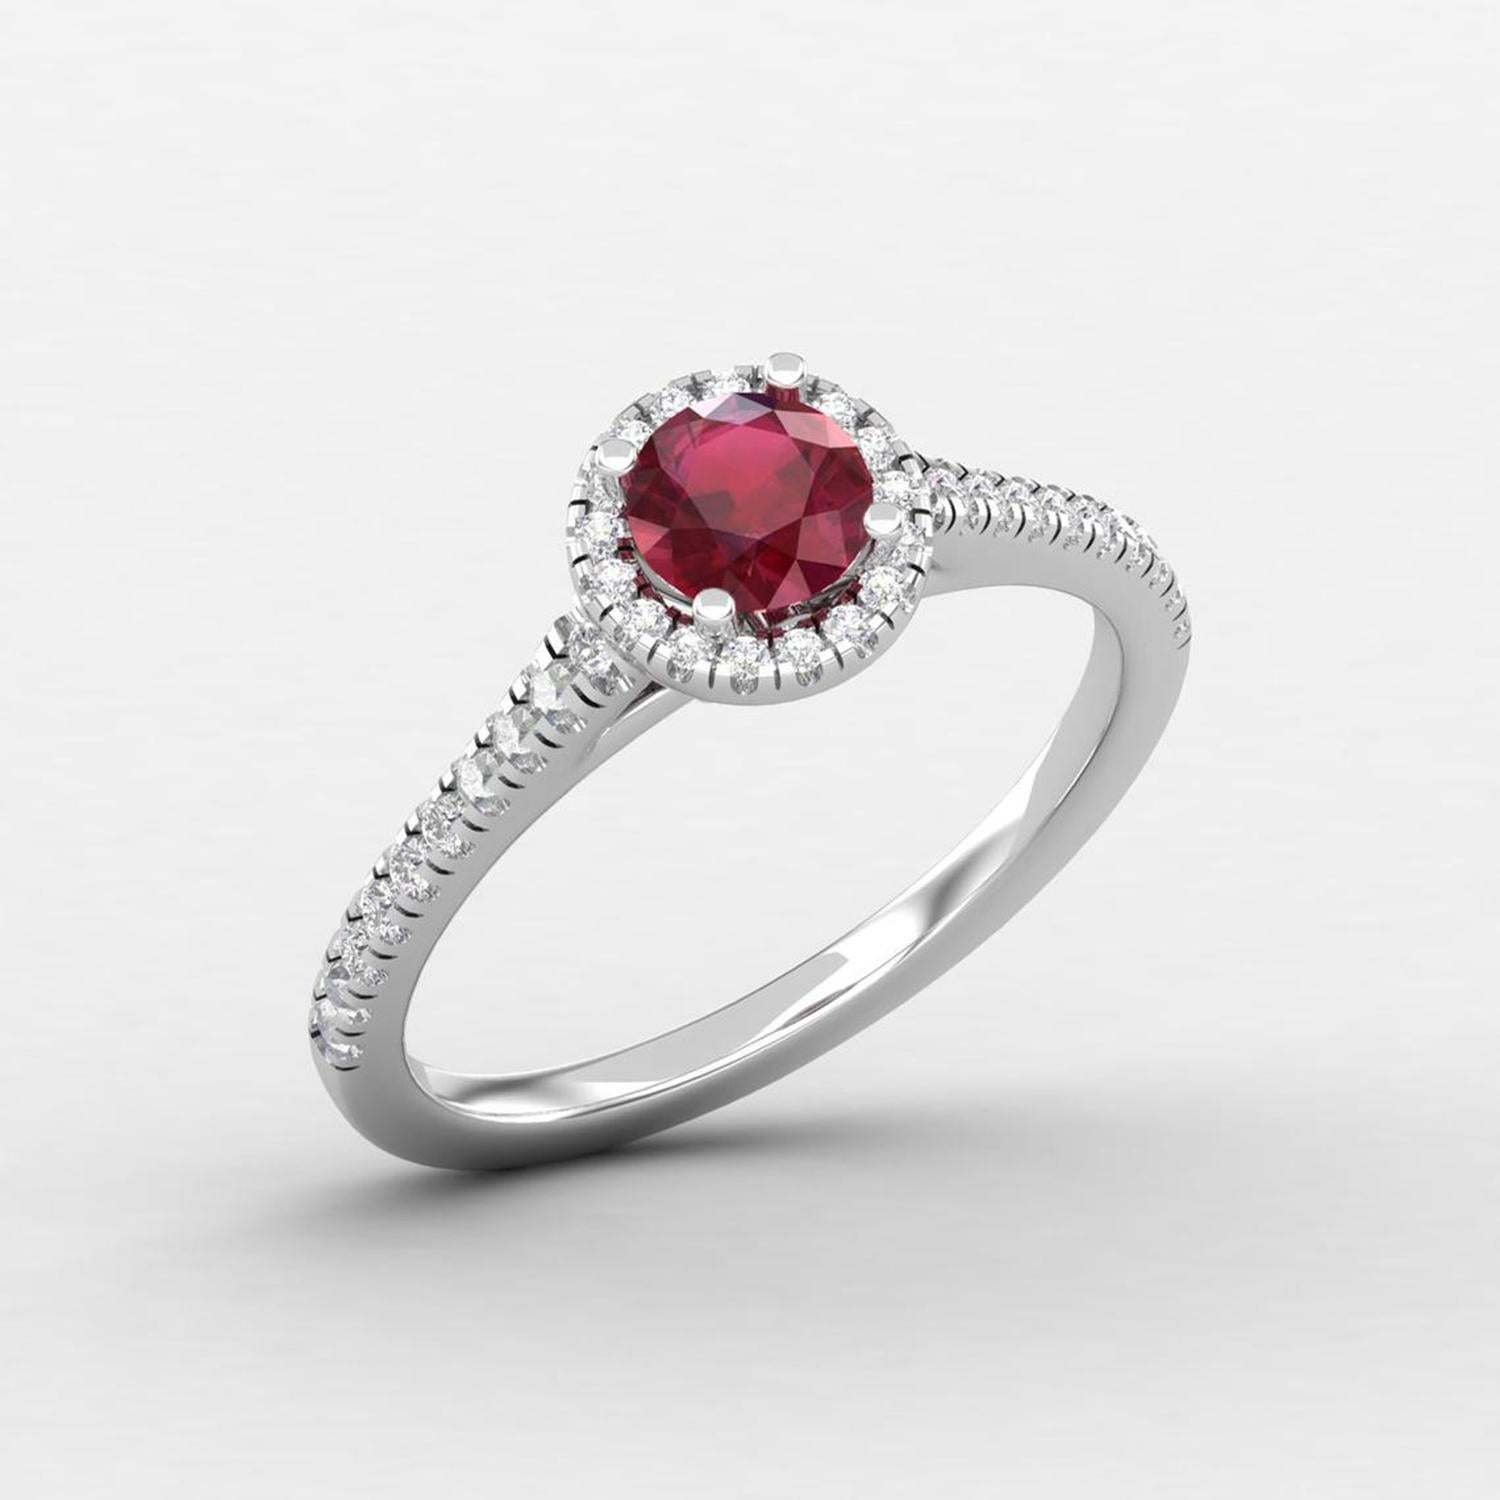 Round Cut 14 Karat Gold Ruby Ring / Round Diamond Ring / Solitaire Ring For Sale